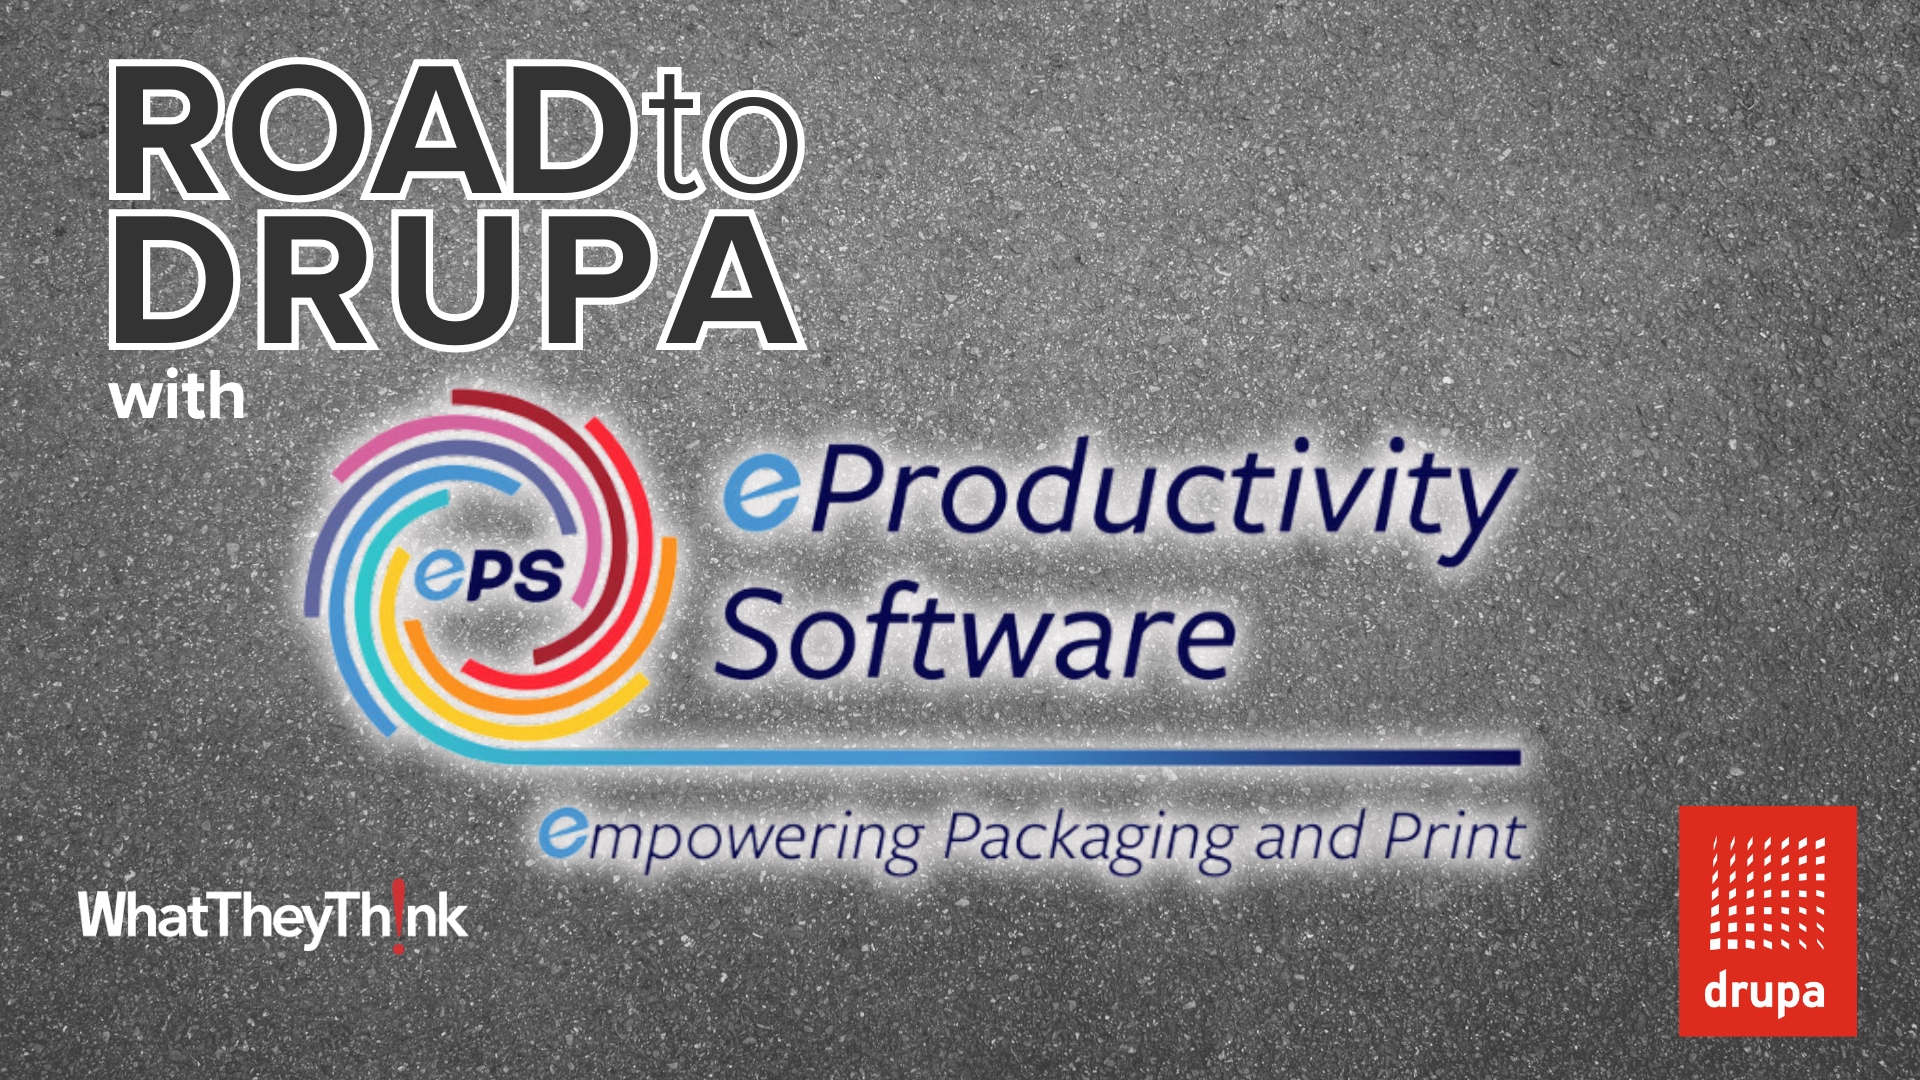 Video preview: Road to drupa: eProductivity Software